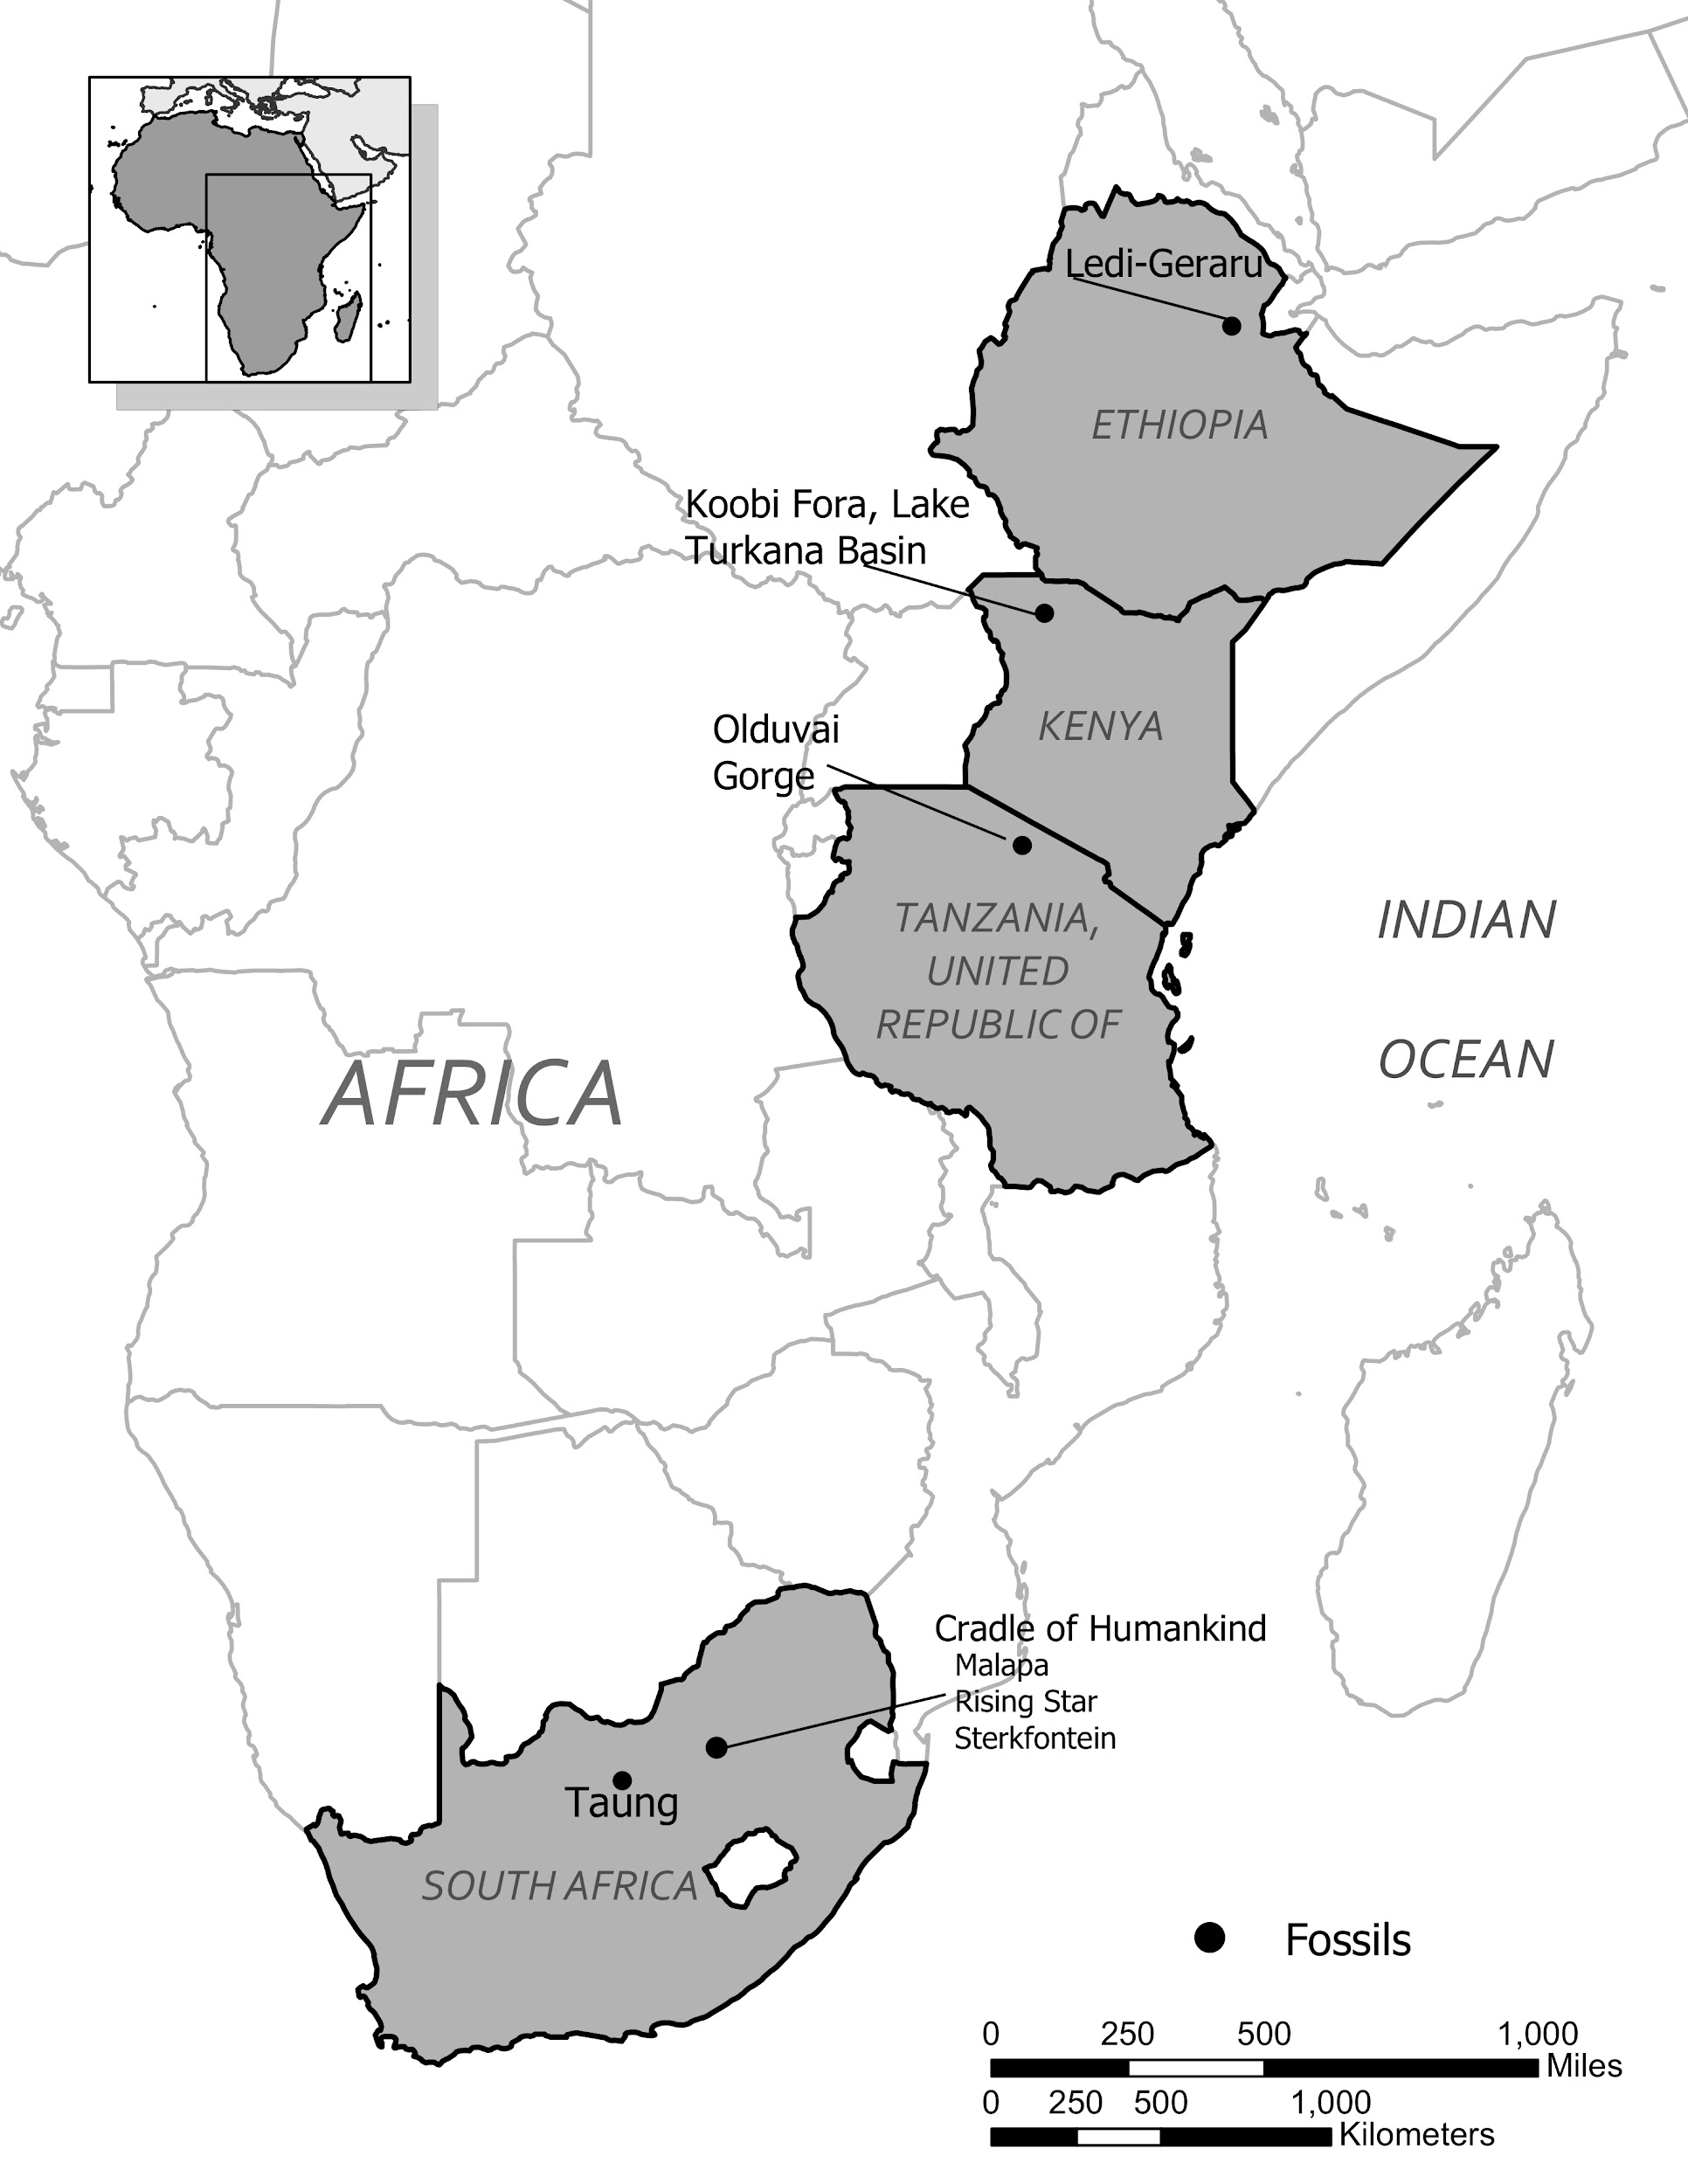 Africa map with South Africa, Tanzania, Kenya, and Ethiopia shaded.